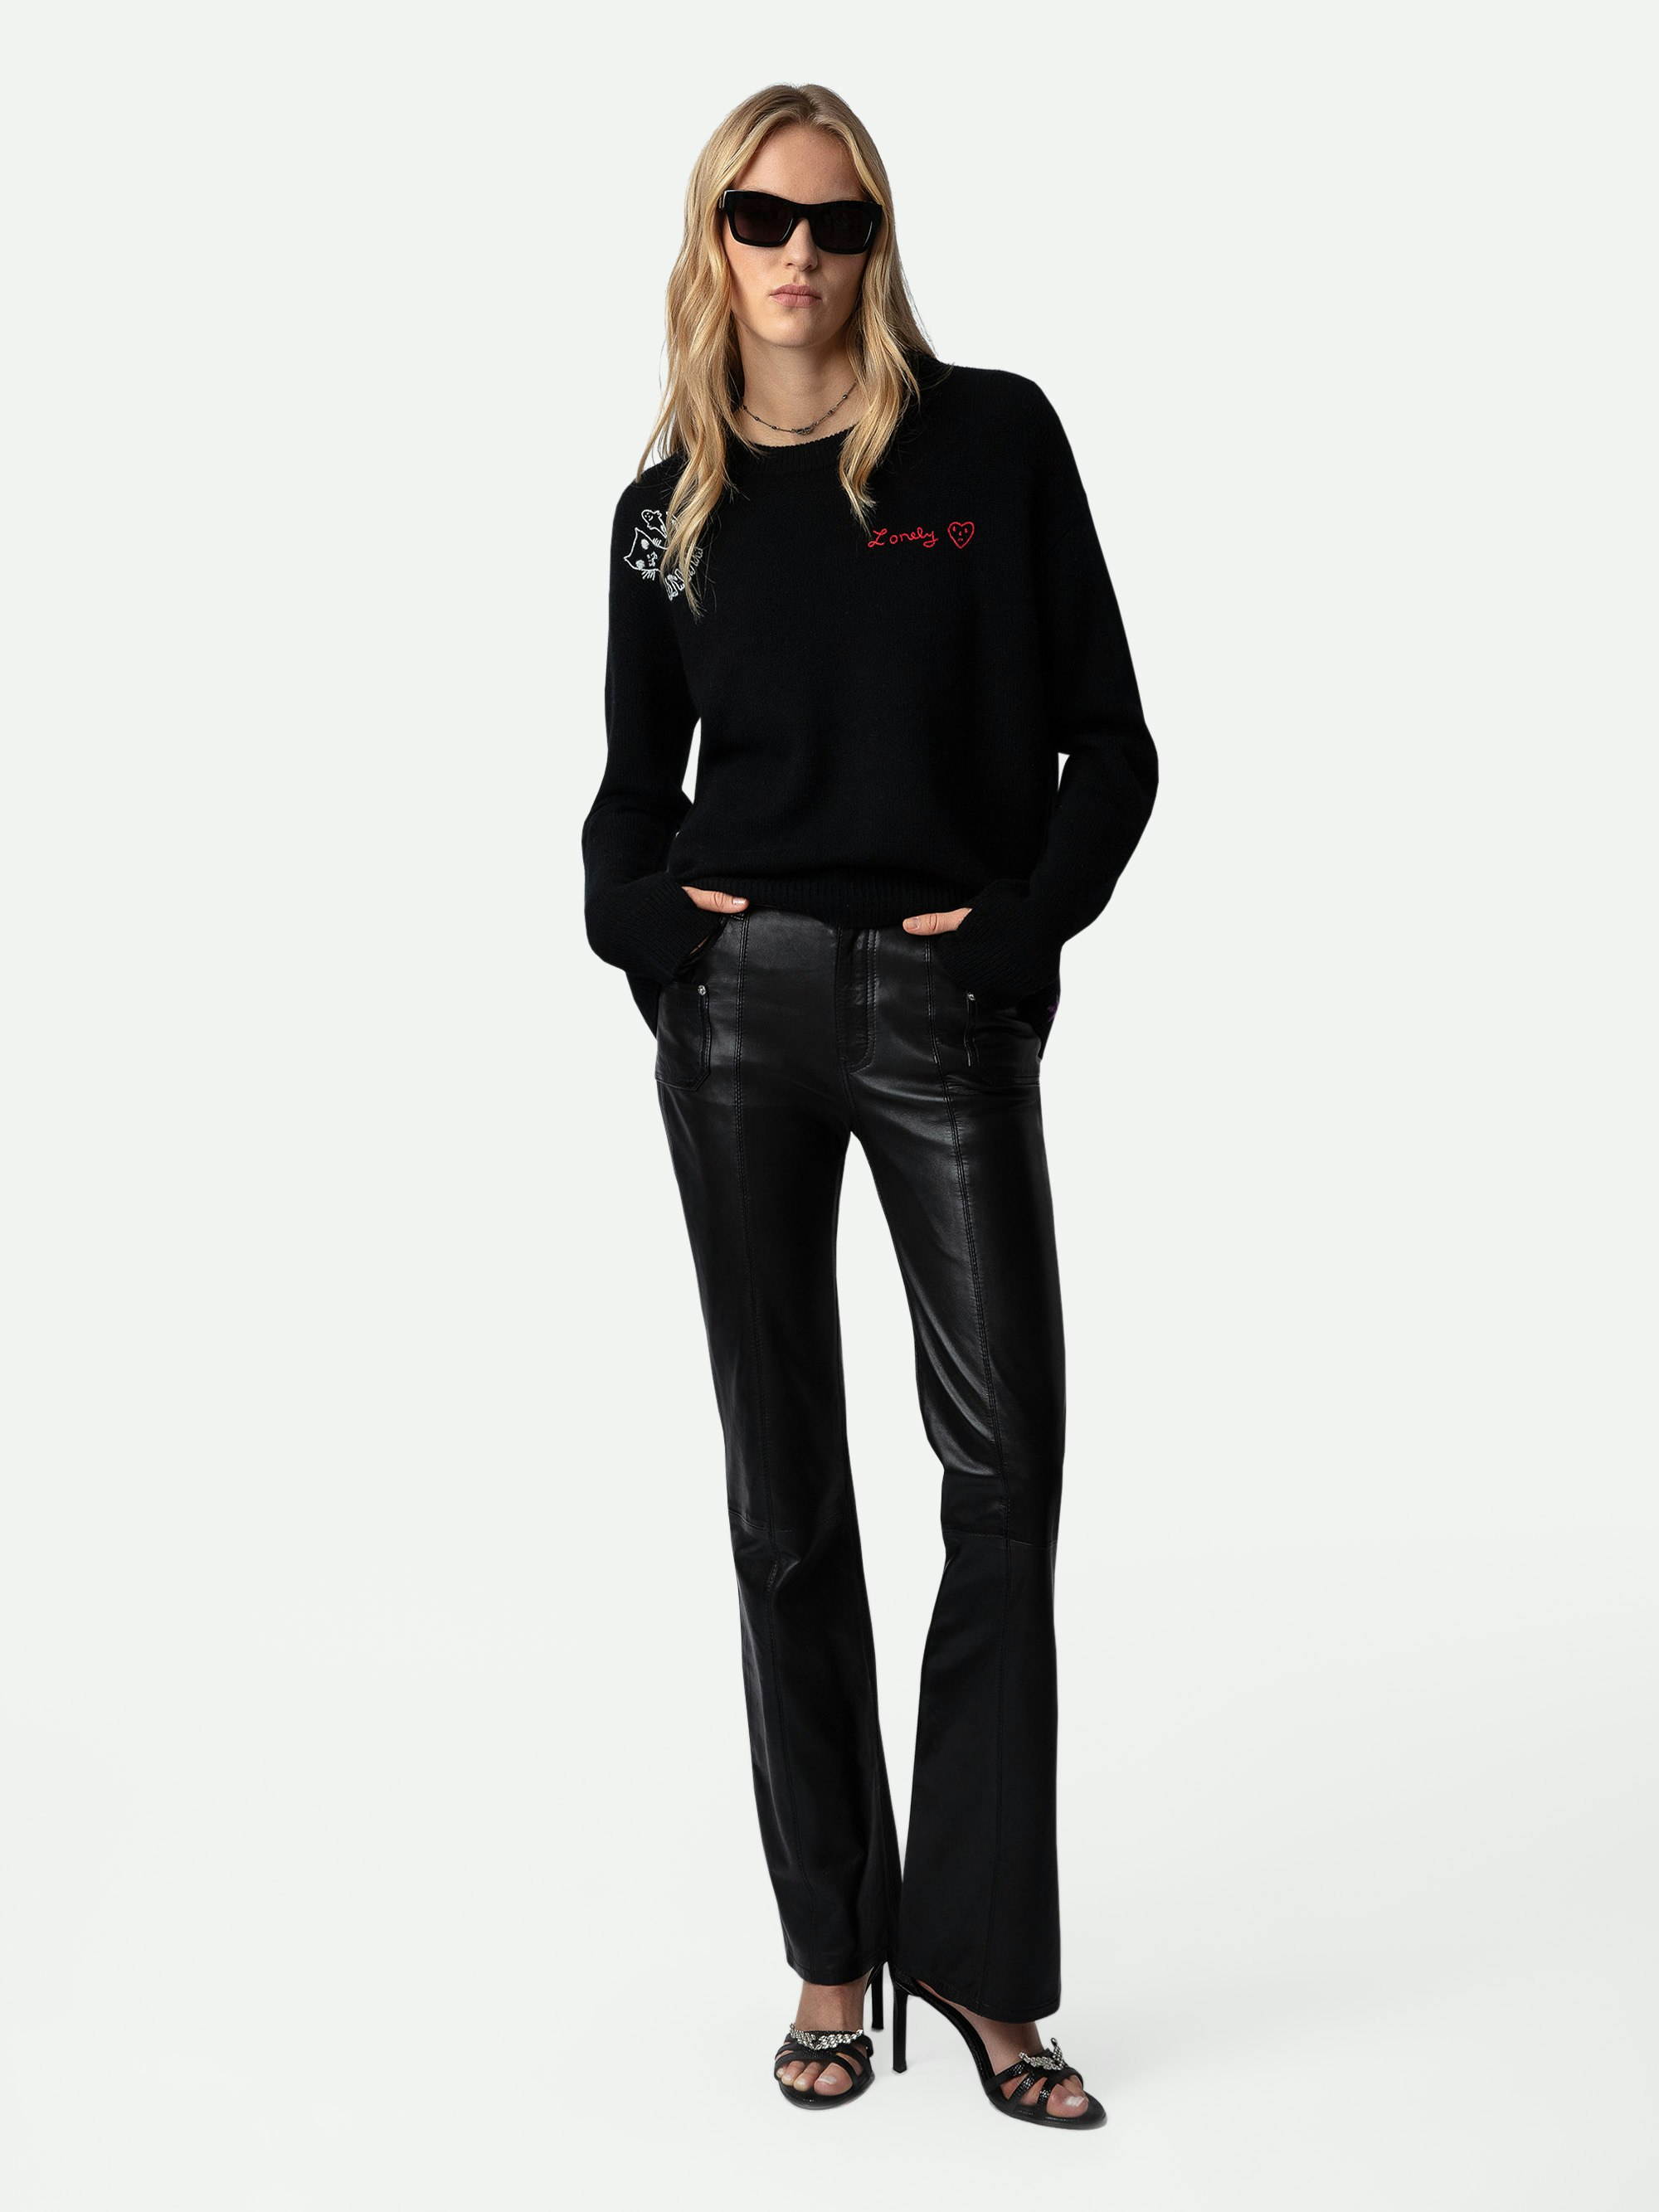 Markus Cashmere Sweater - Women's black cashmere sweater with customized details designed by Humberto Cruz.